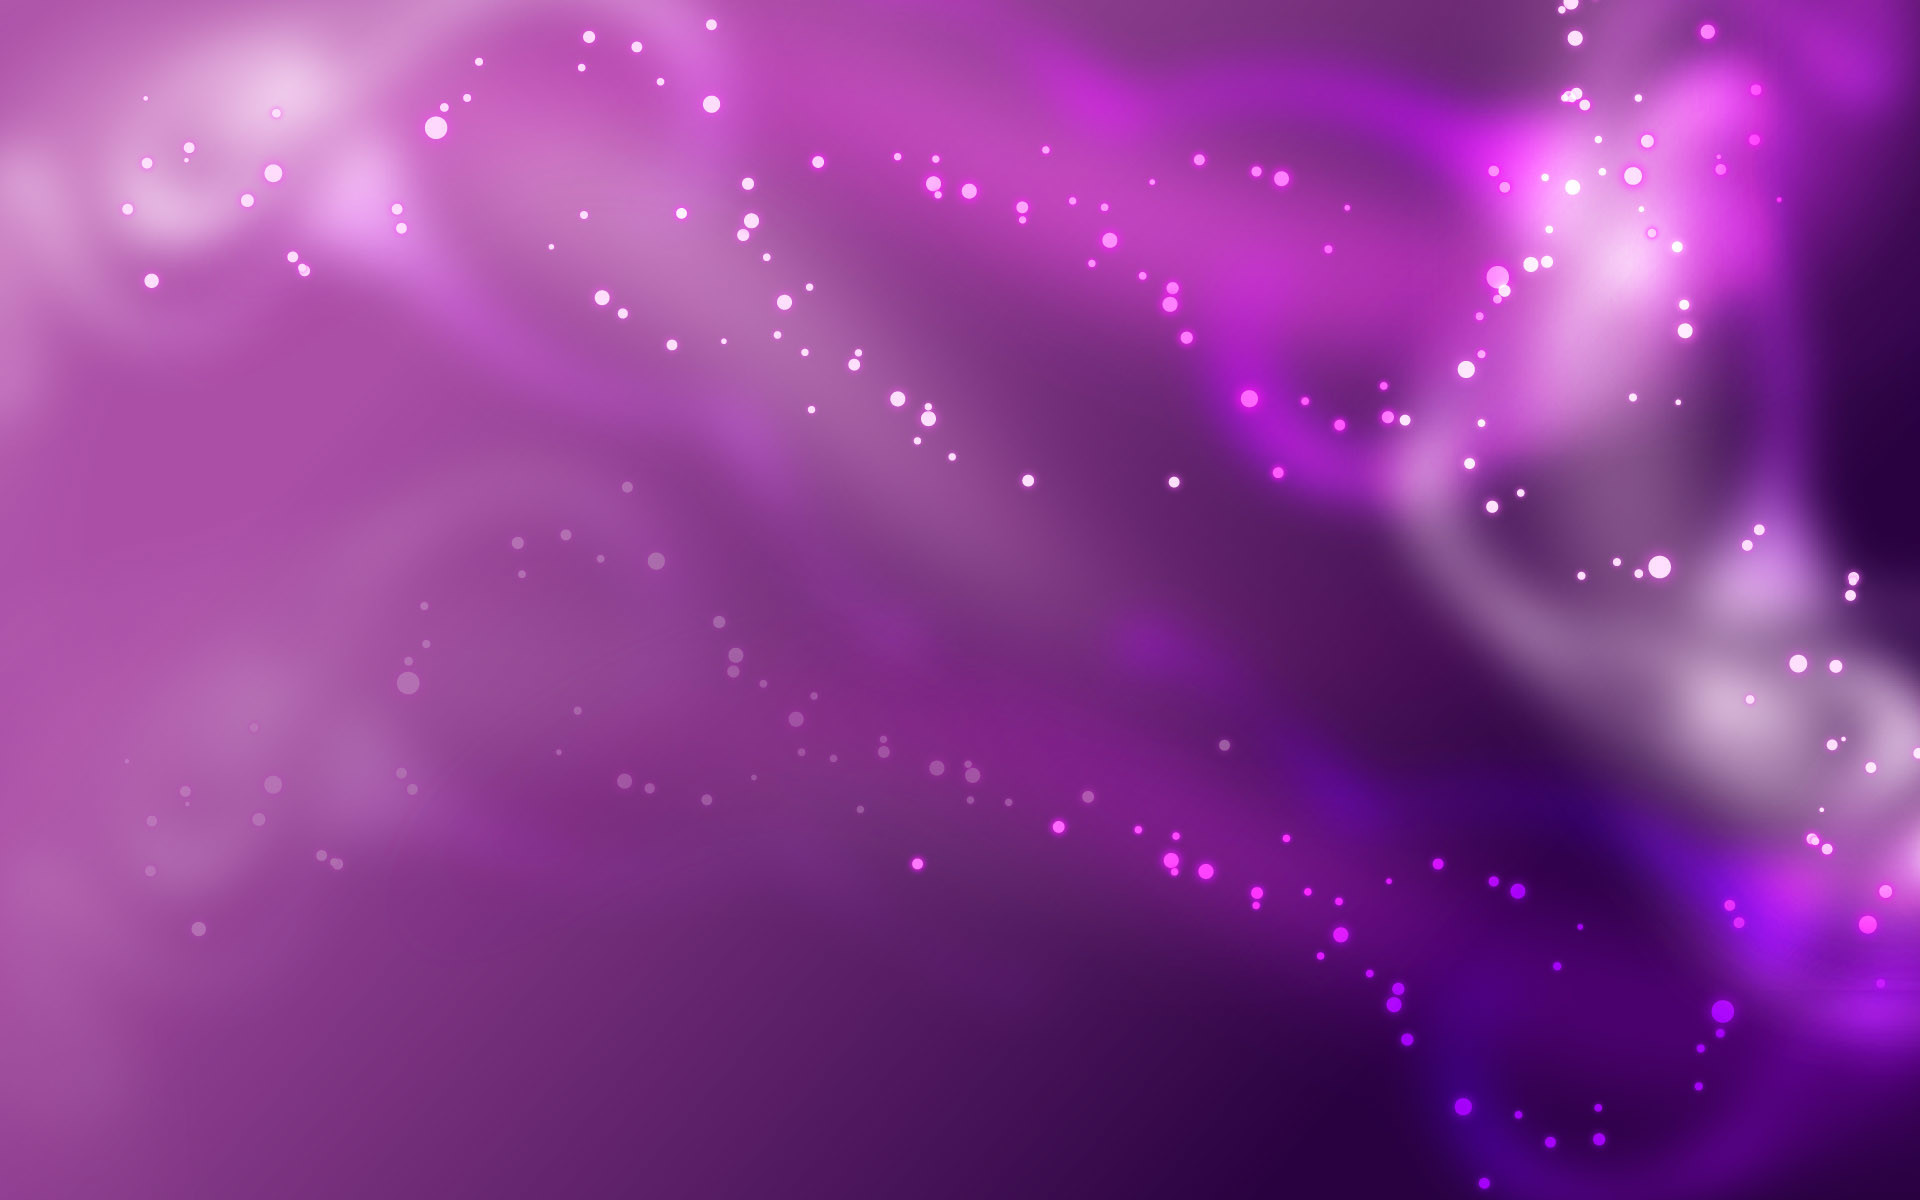 1920x1200 1920x1080 Pink Purple And Blue Wallpaper - HD Wallpapers Pretty